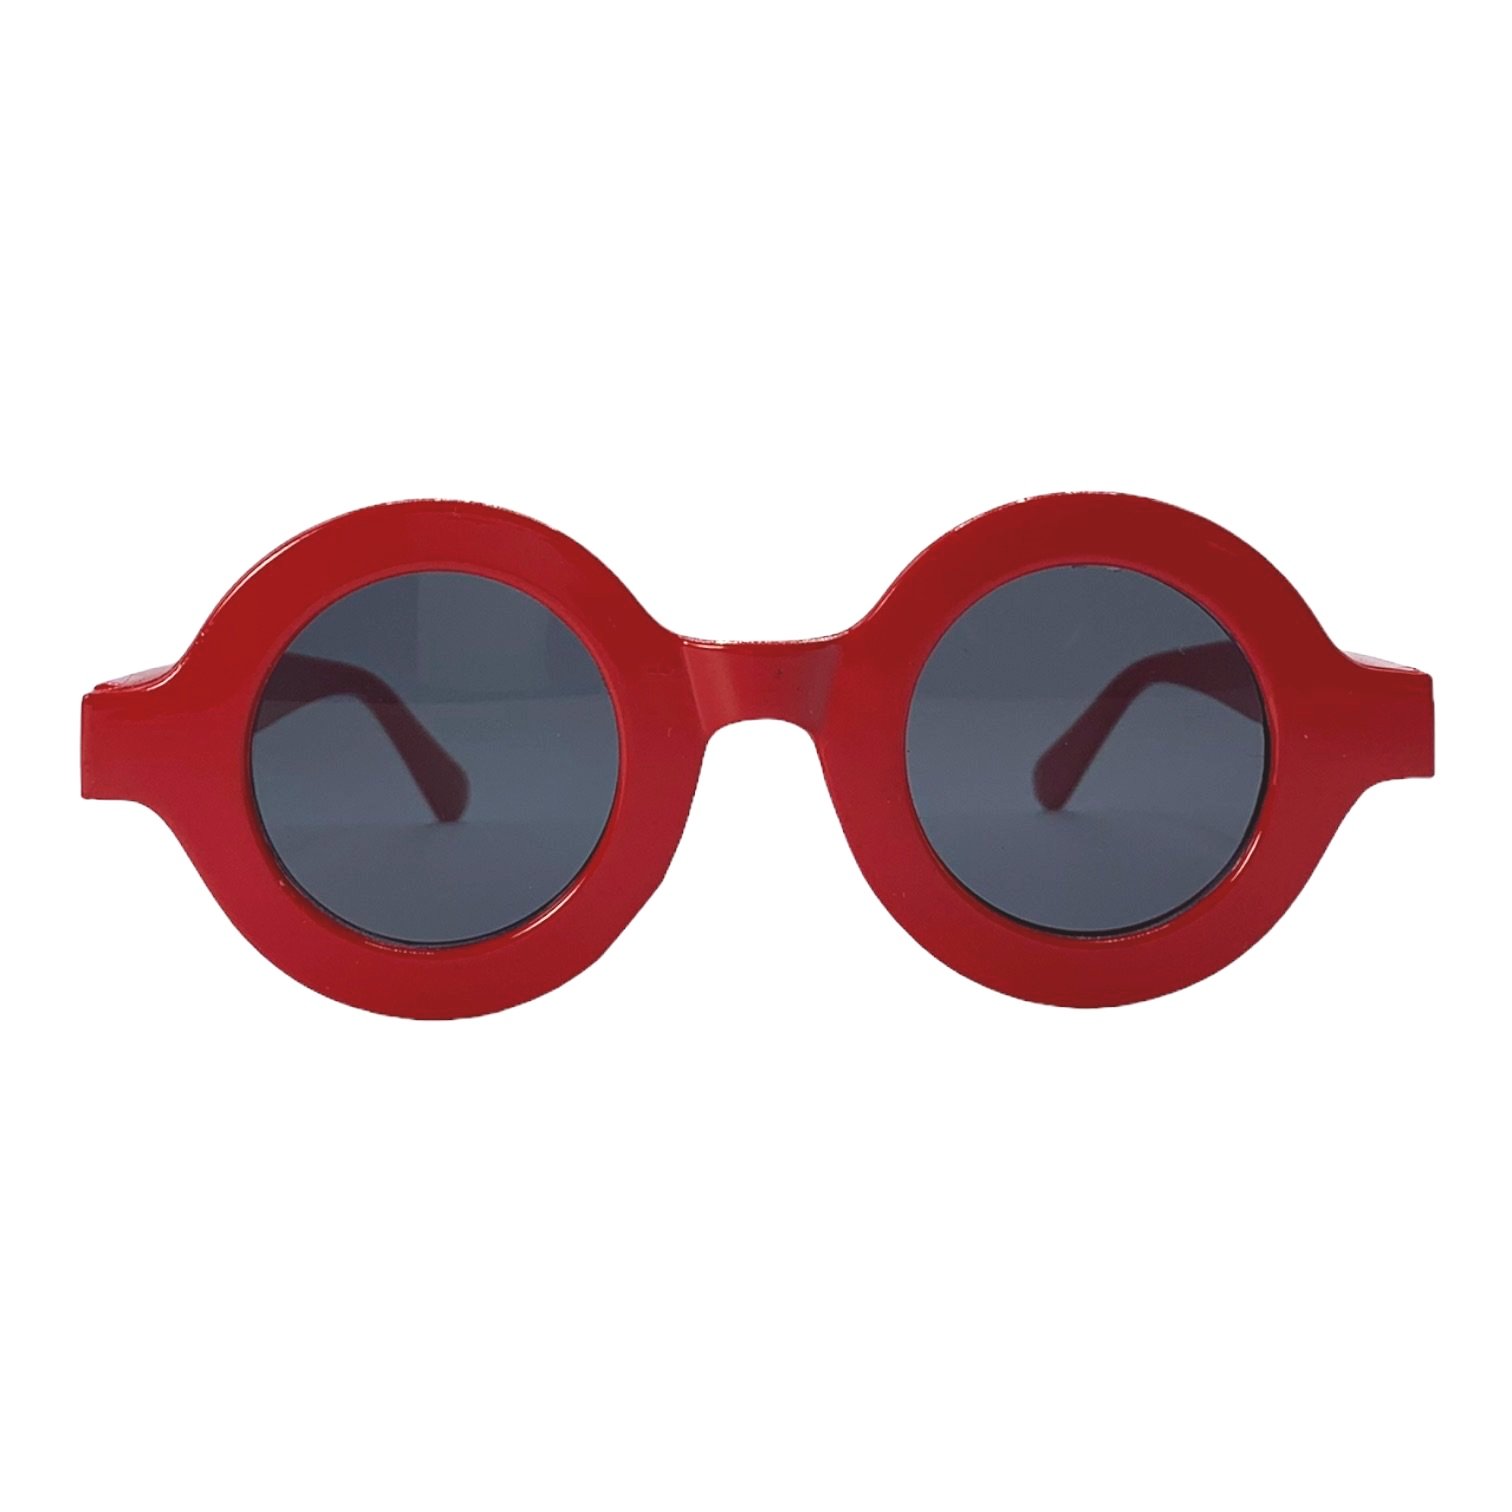 Discover more than 215 red round sunglasses